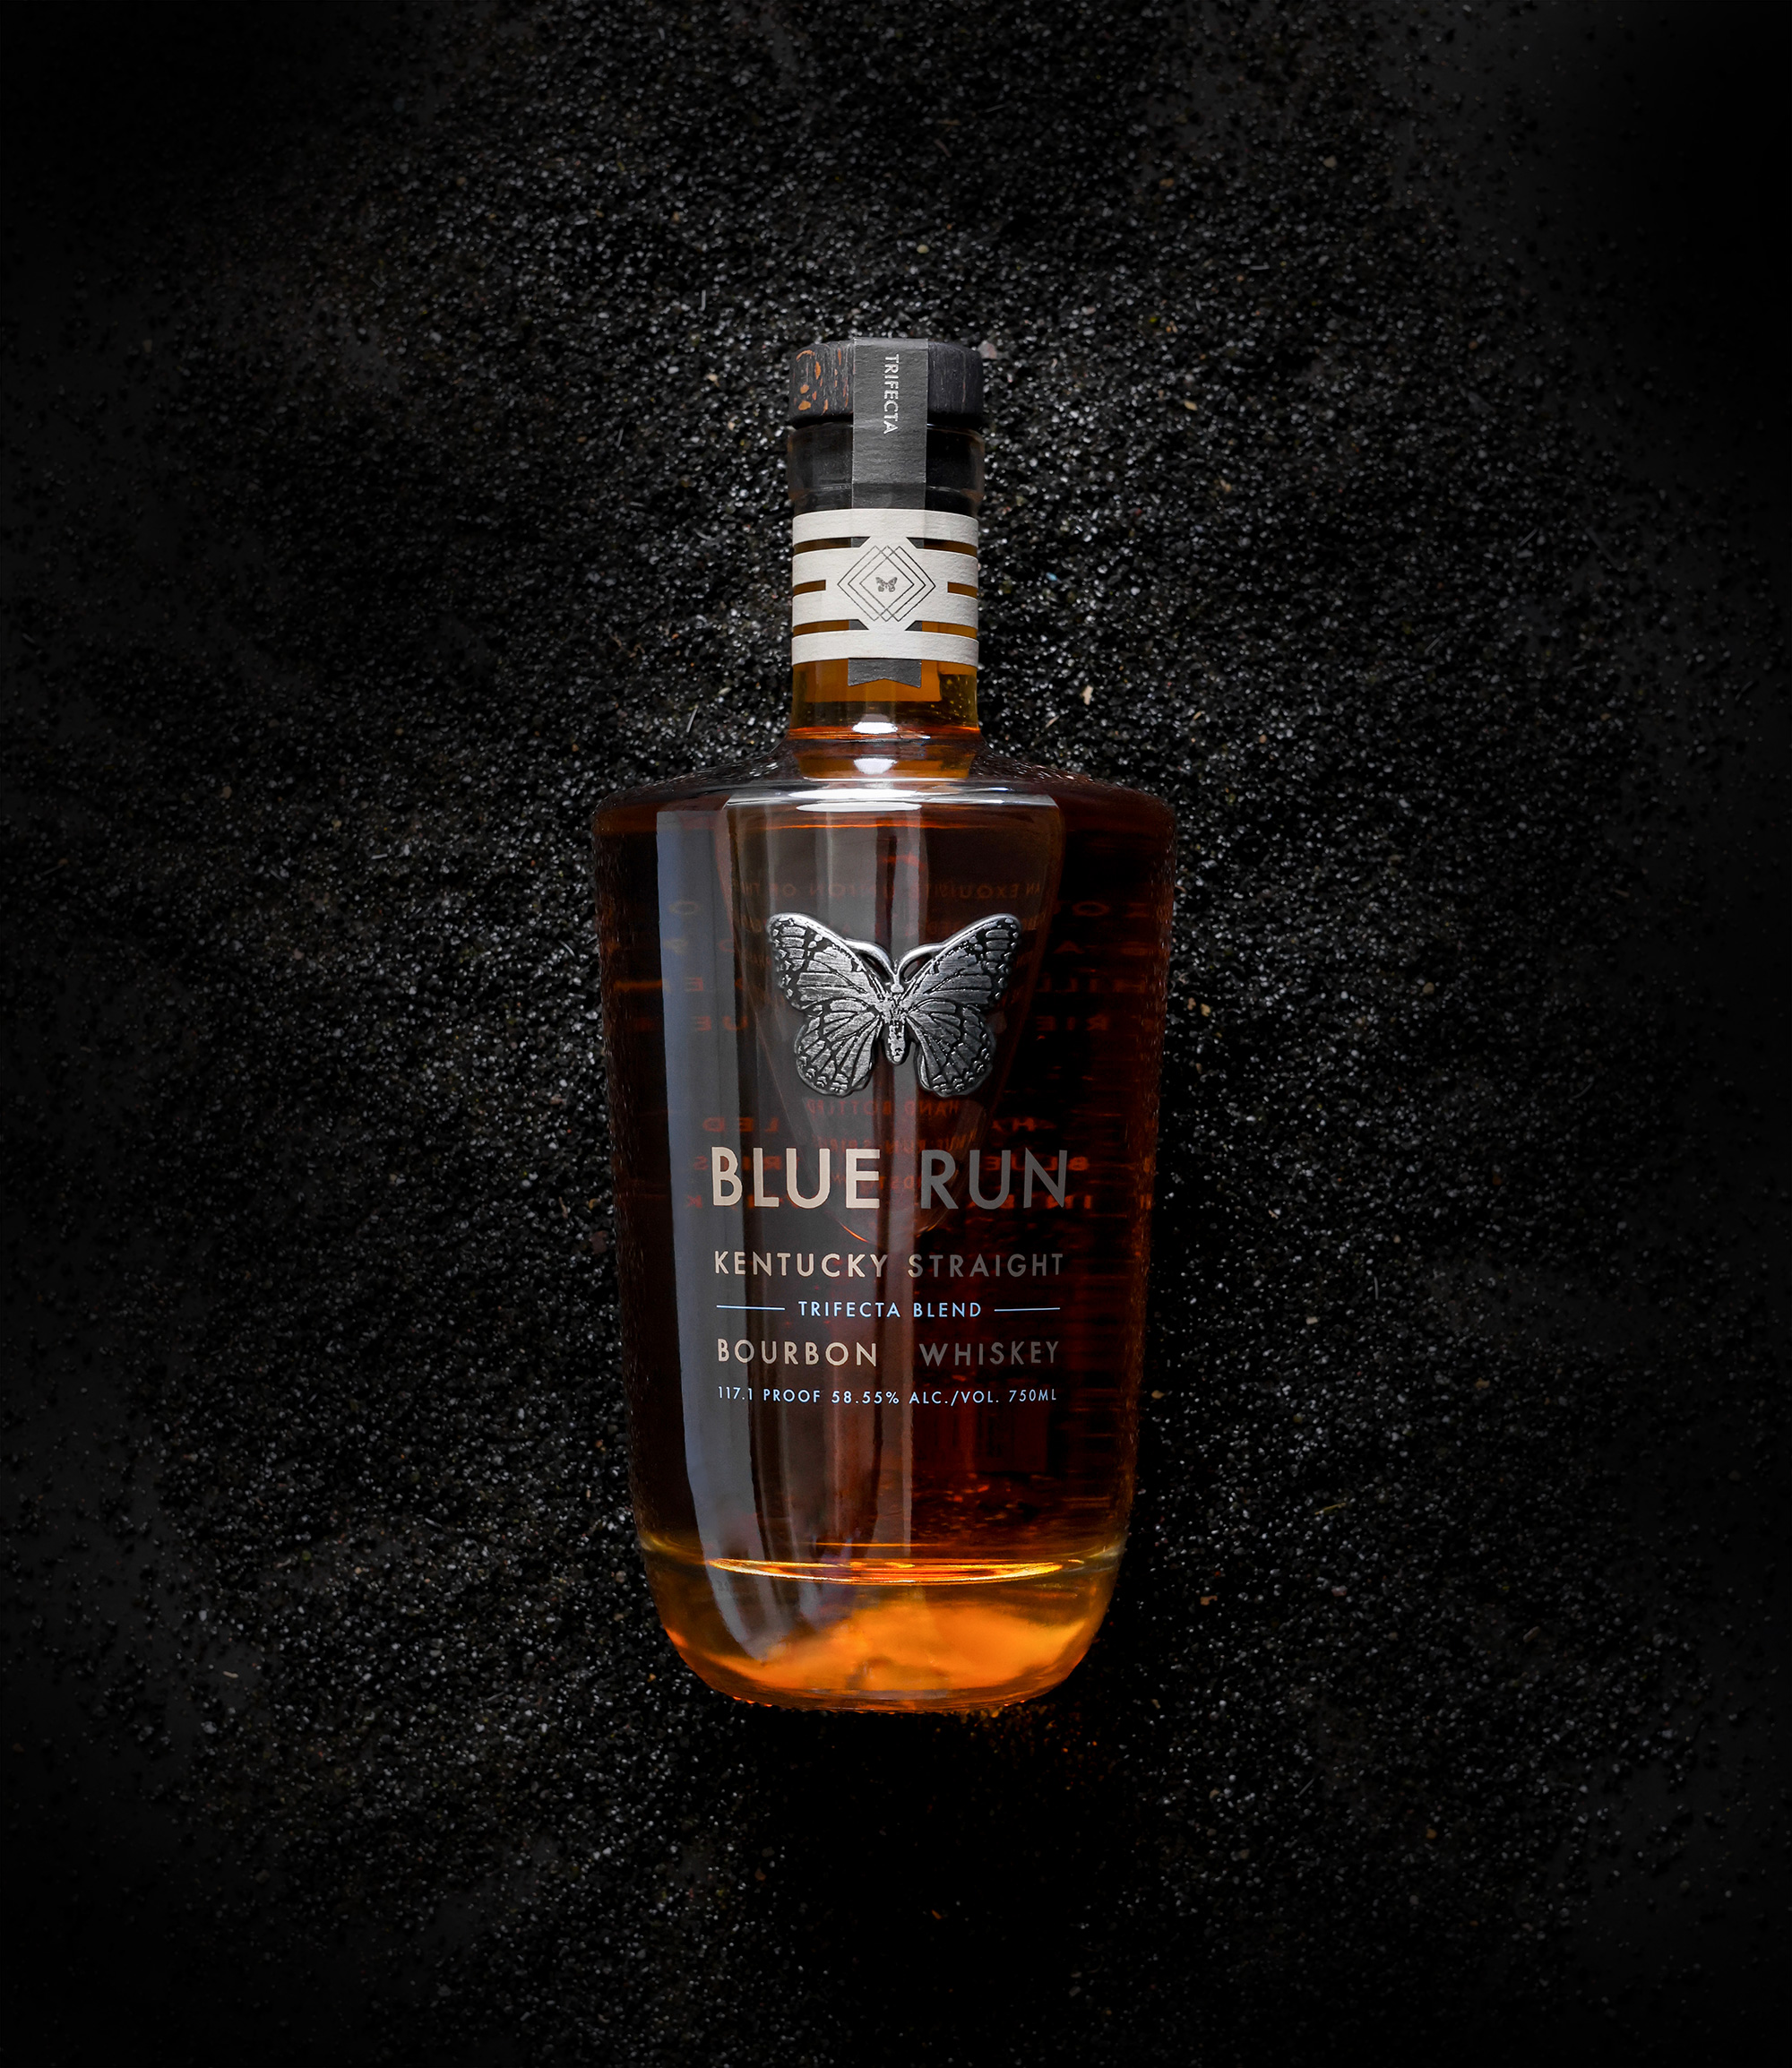 Blue Run Hits A “Trifecta” With New Bourbon Release